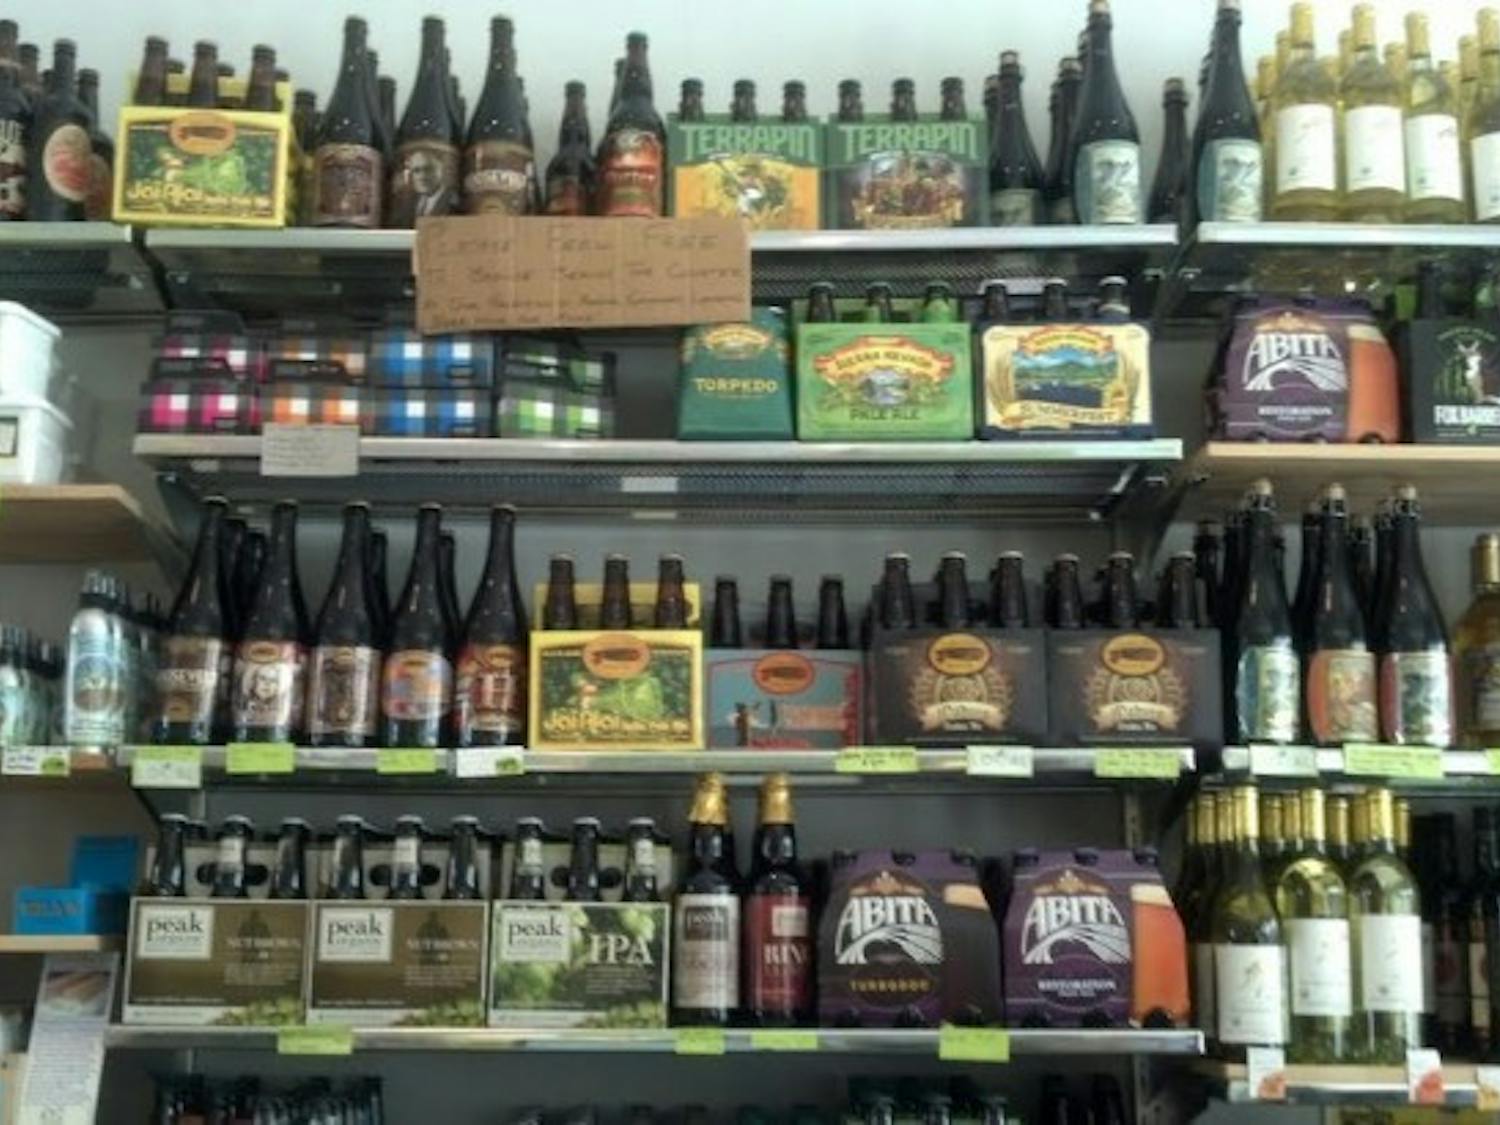 Filling five shelves right behind the checkout counter, the co-op’s beer, wine and cider collection is a welcome sight to beer lovers who also want to help support the local economy.